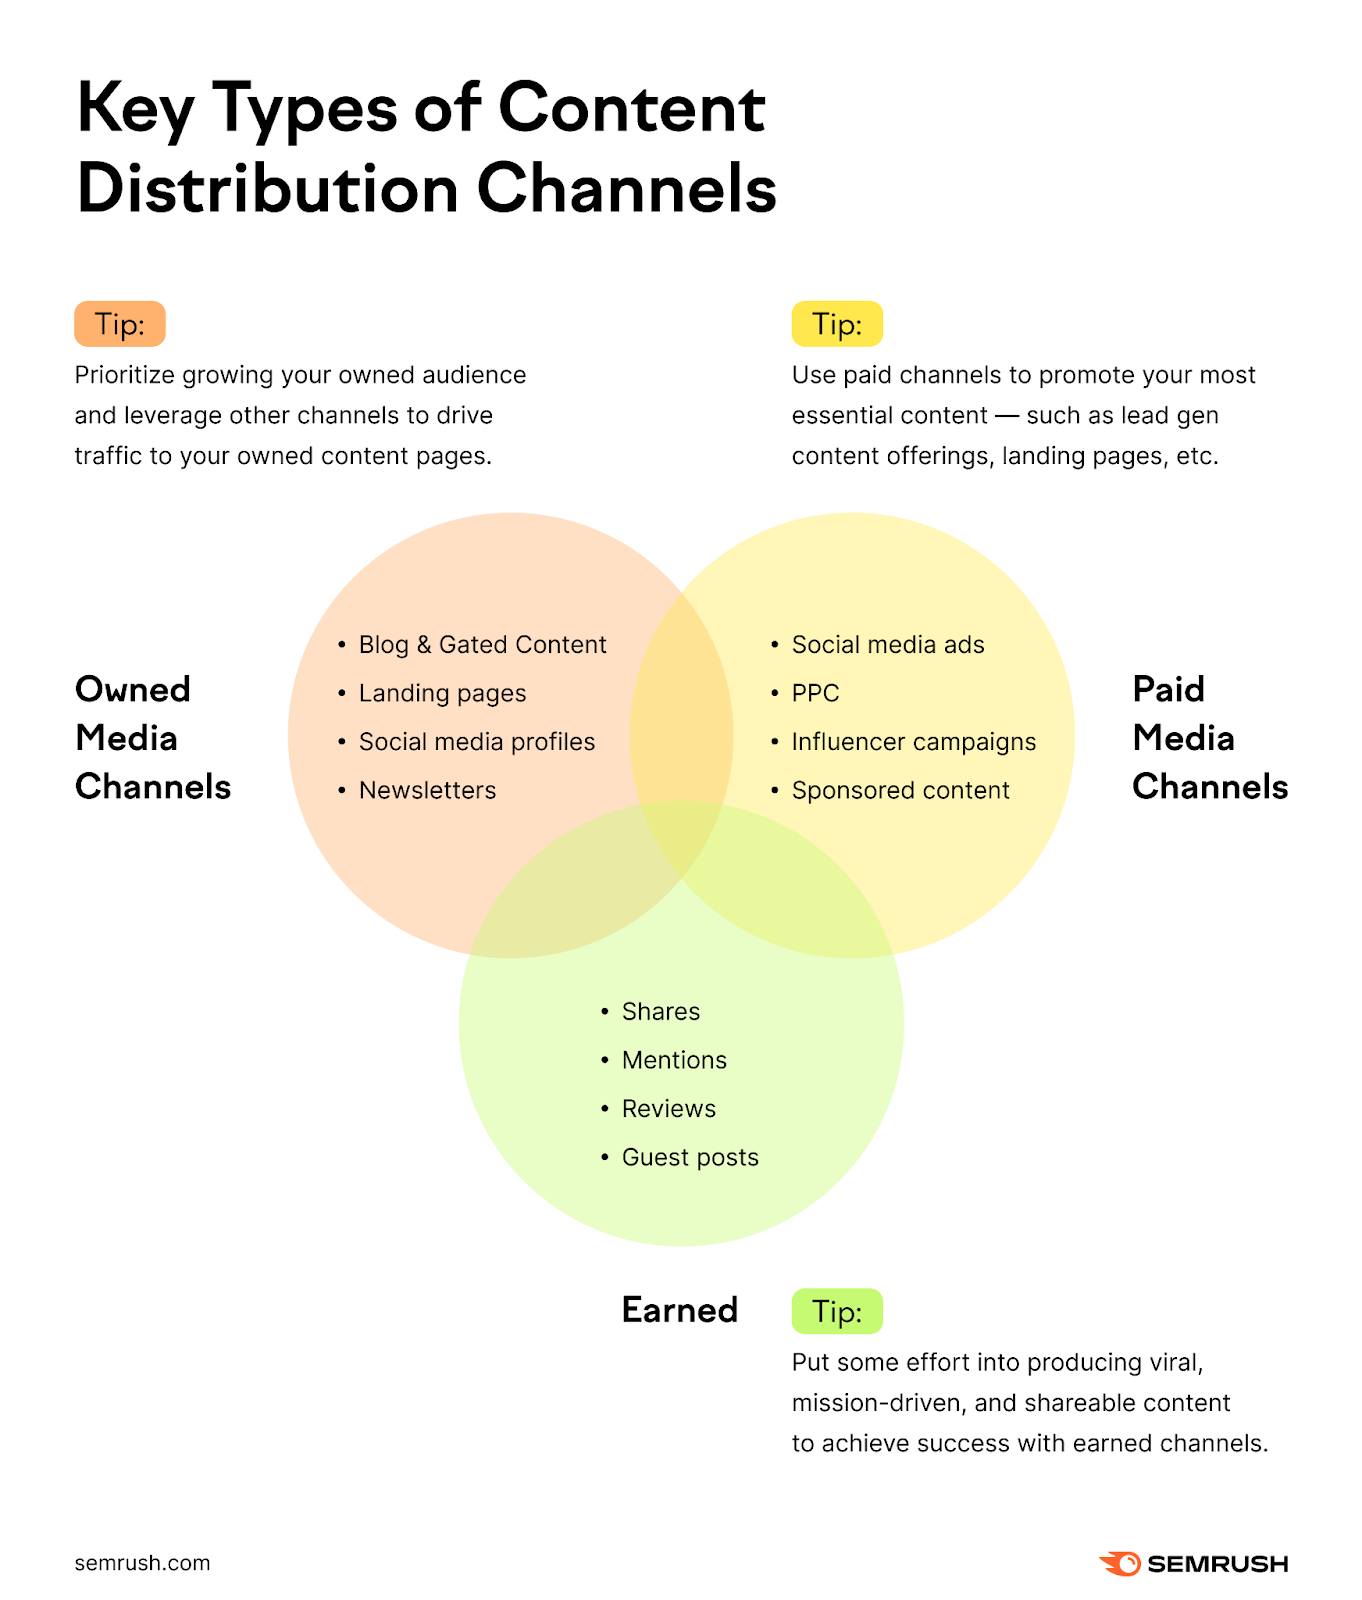 An infographic mapping key types of content distribution channels and related tips